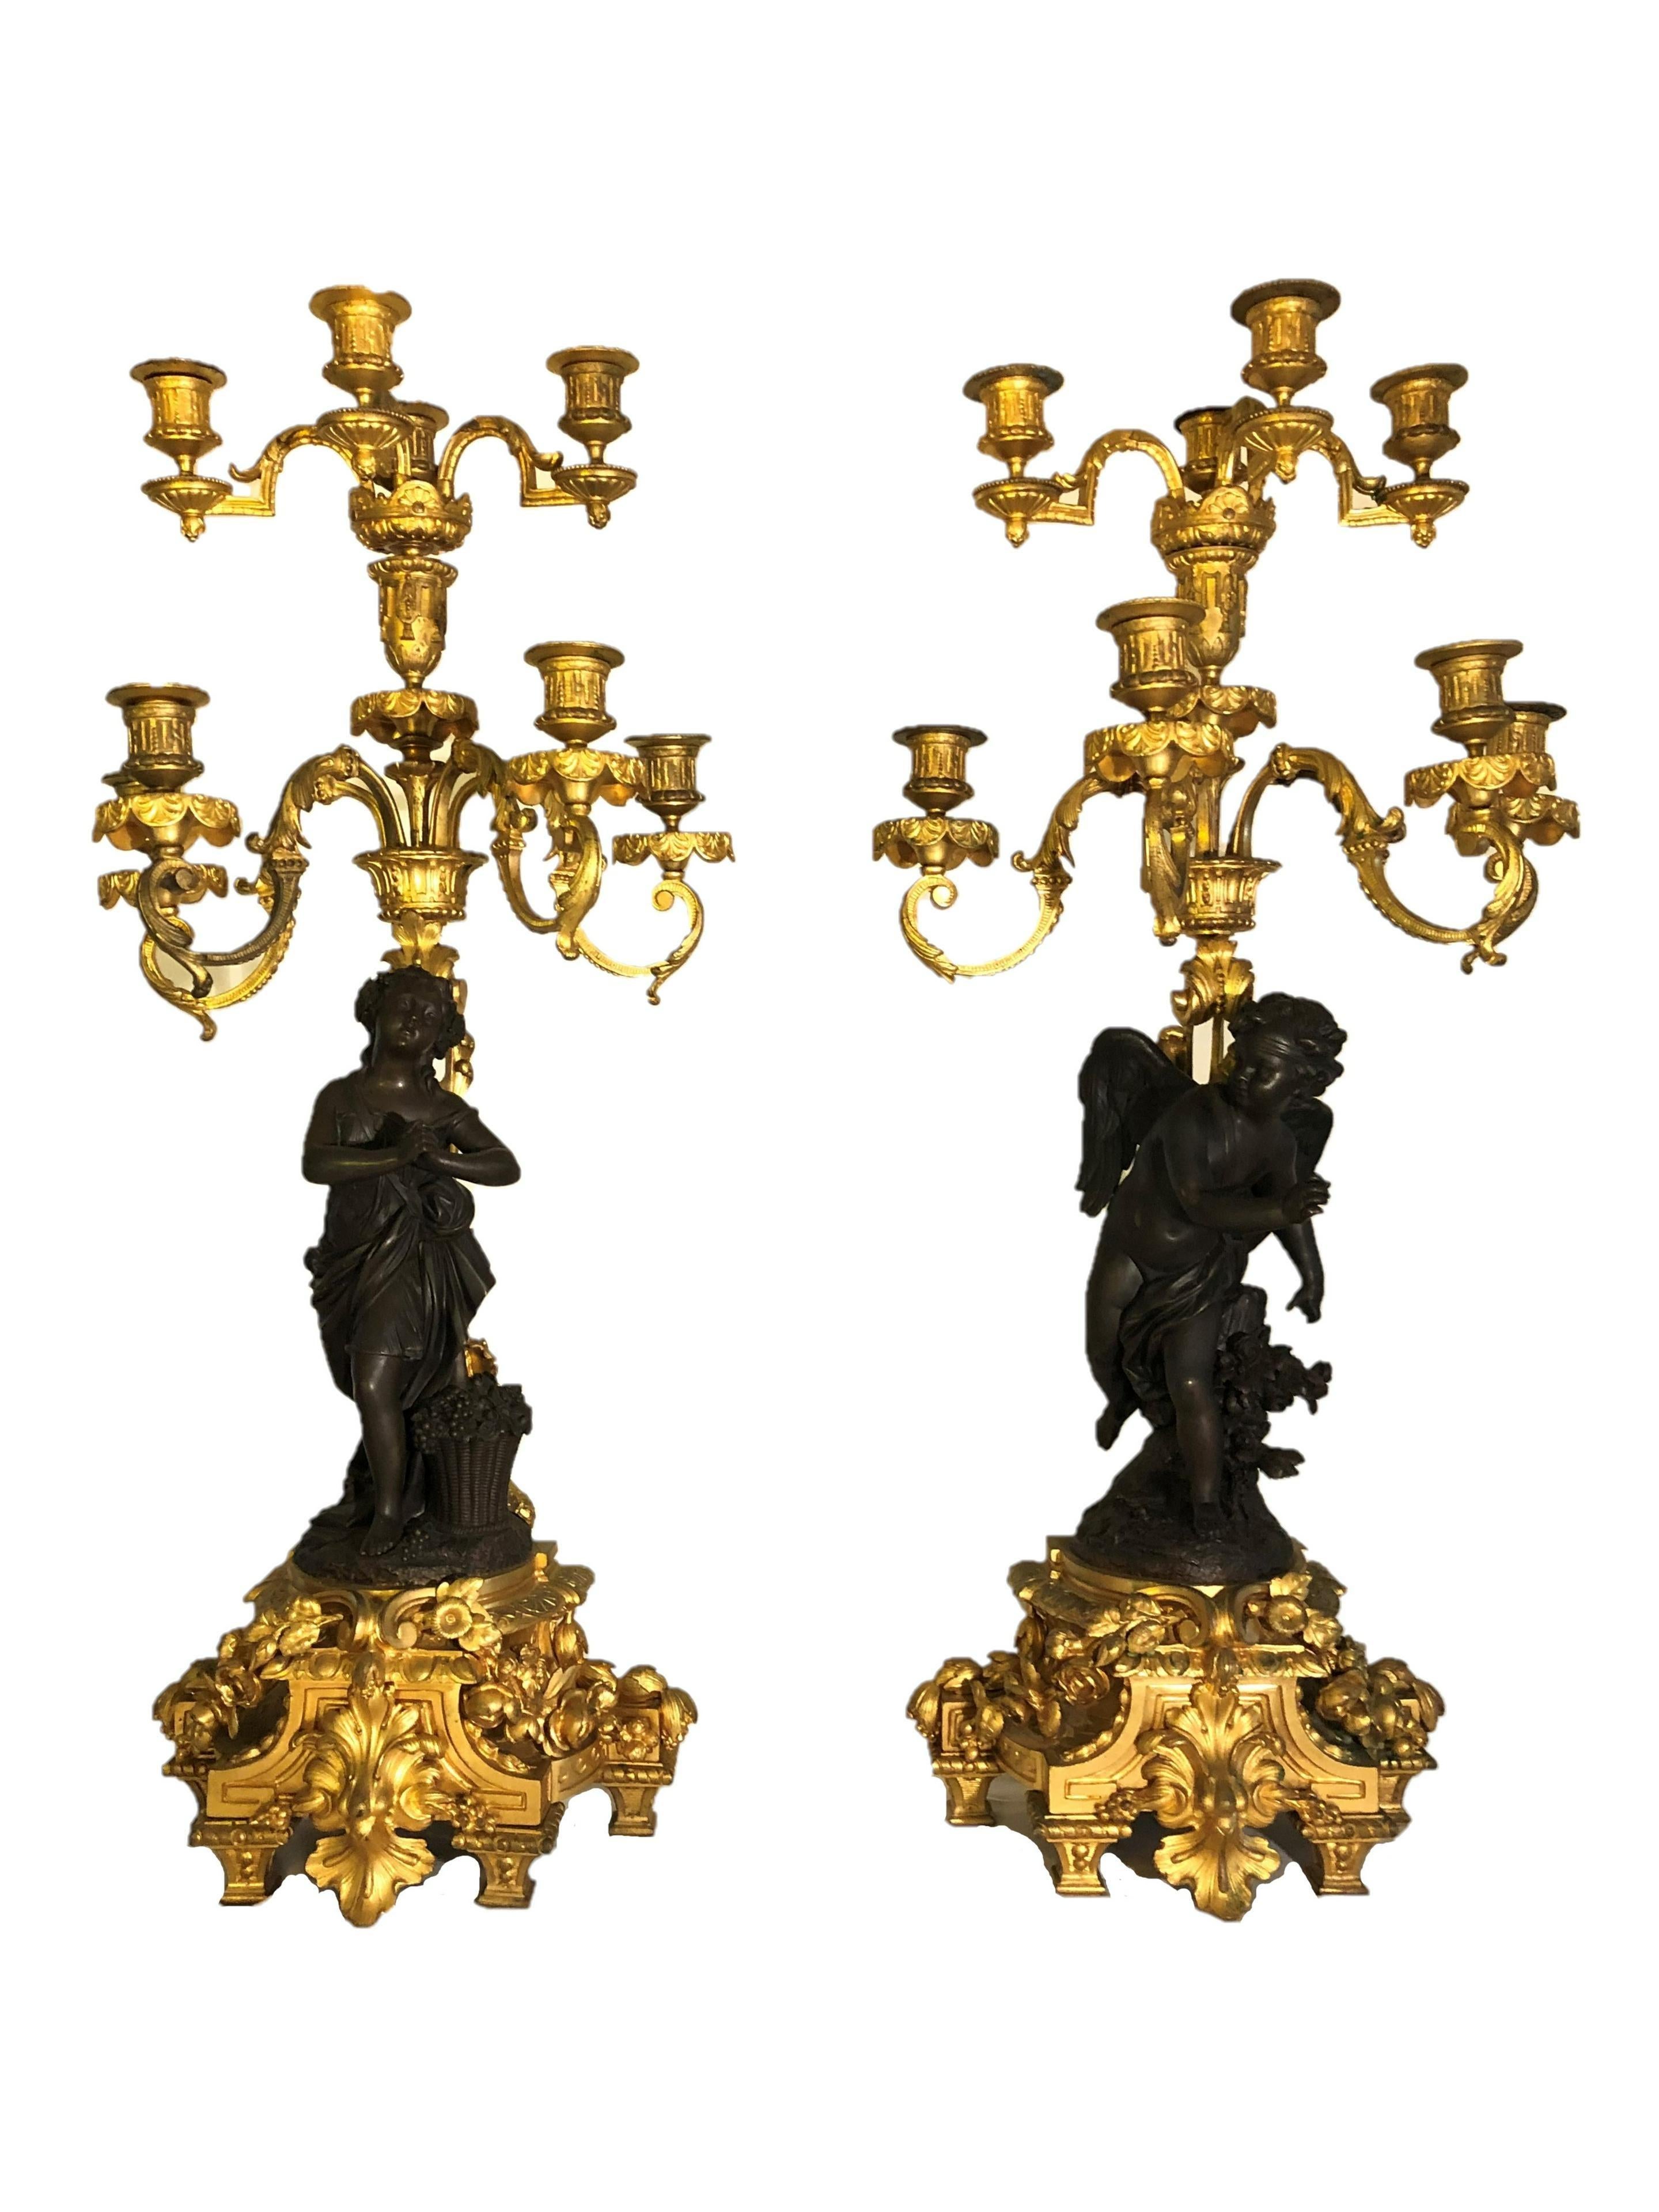 Beautiful Pair of 19th Century French Gilt Bronze and Patinted Candelabra's In Good Condition For Sale In Dallas, TX